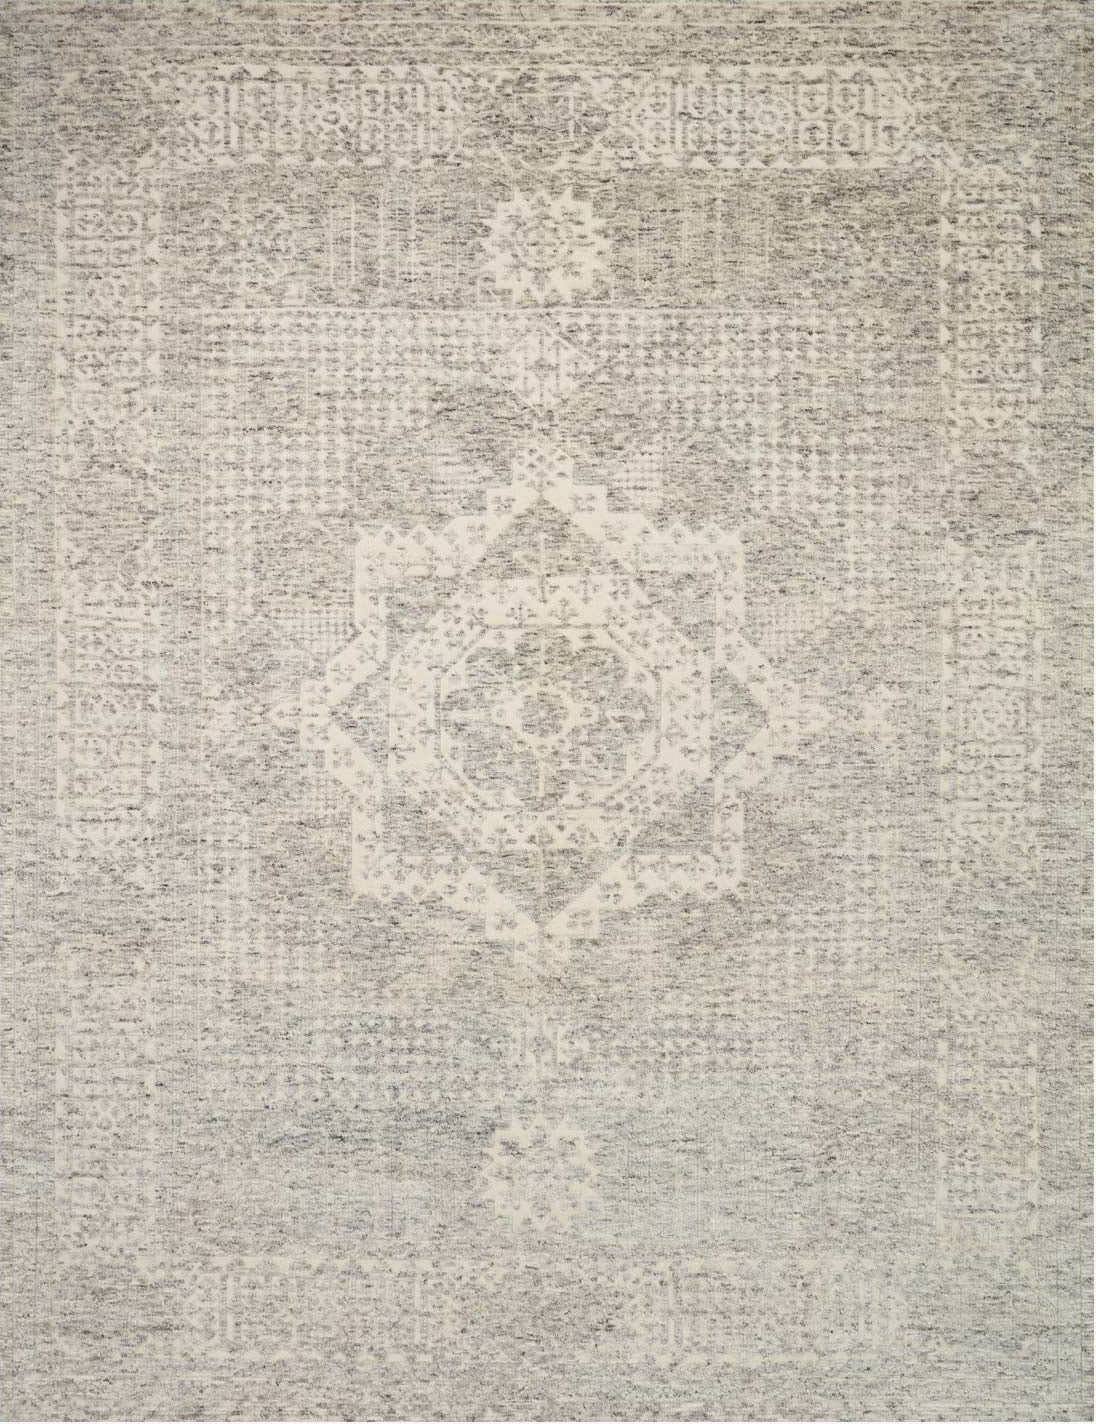 Loloi Indo Transitional Wool One of a Kind Ivory/White Area Rug main image